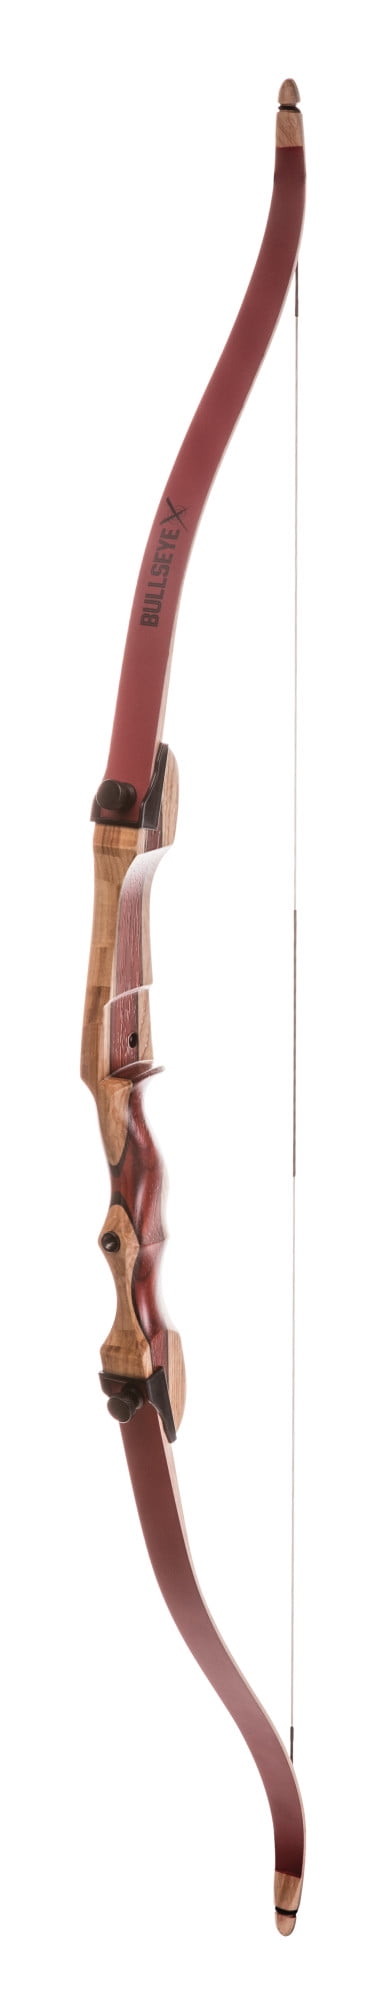 BEAR ARCHERY Ausable 64 in environ 162.56 cm Traditional Bow 